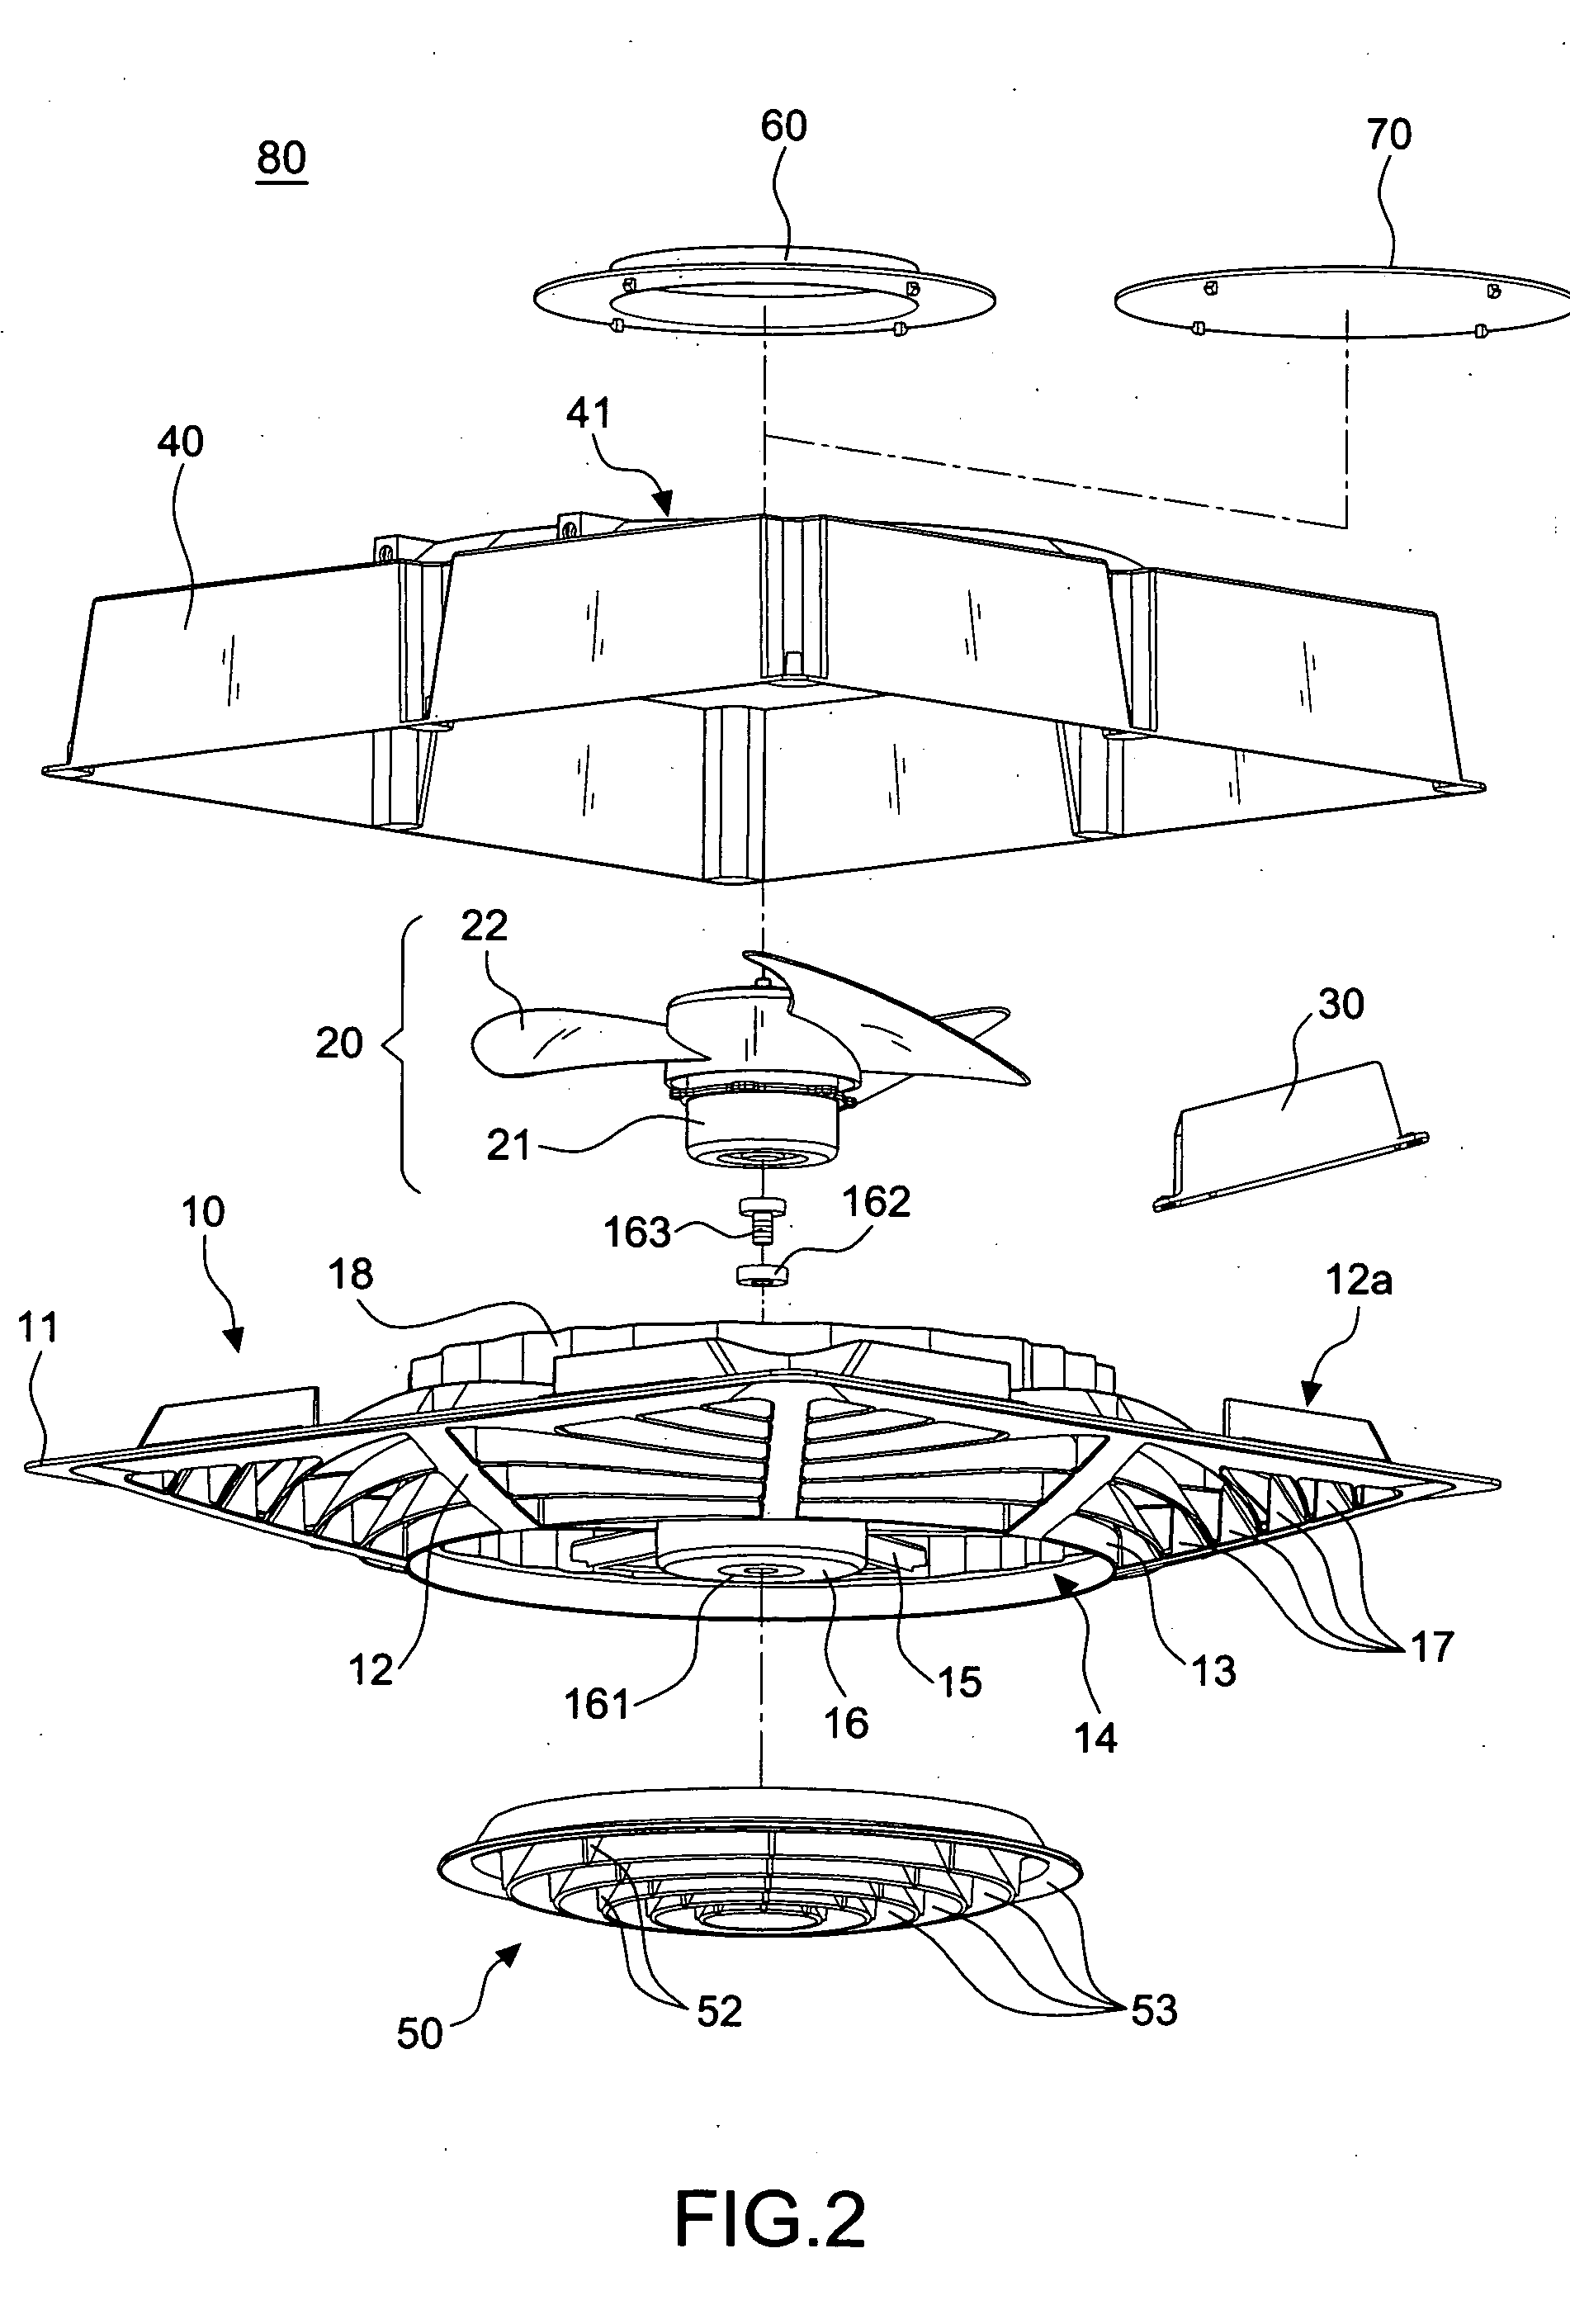 Airflow-cooling apparatus for a ceiling air-conditioning circulation machine